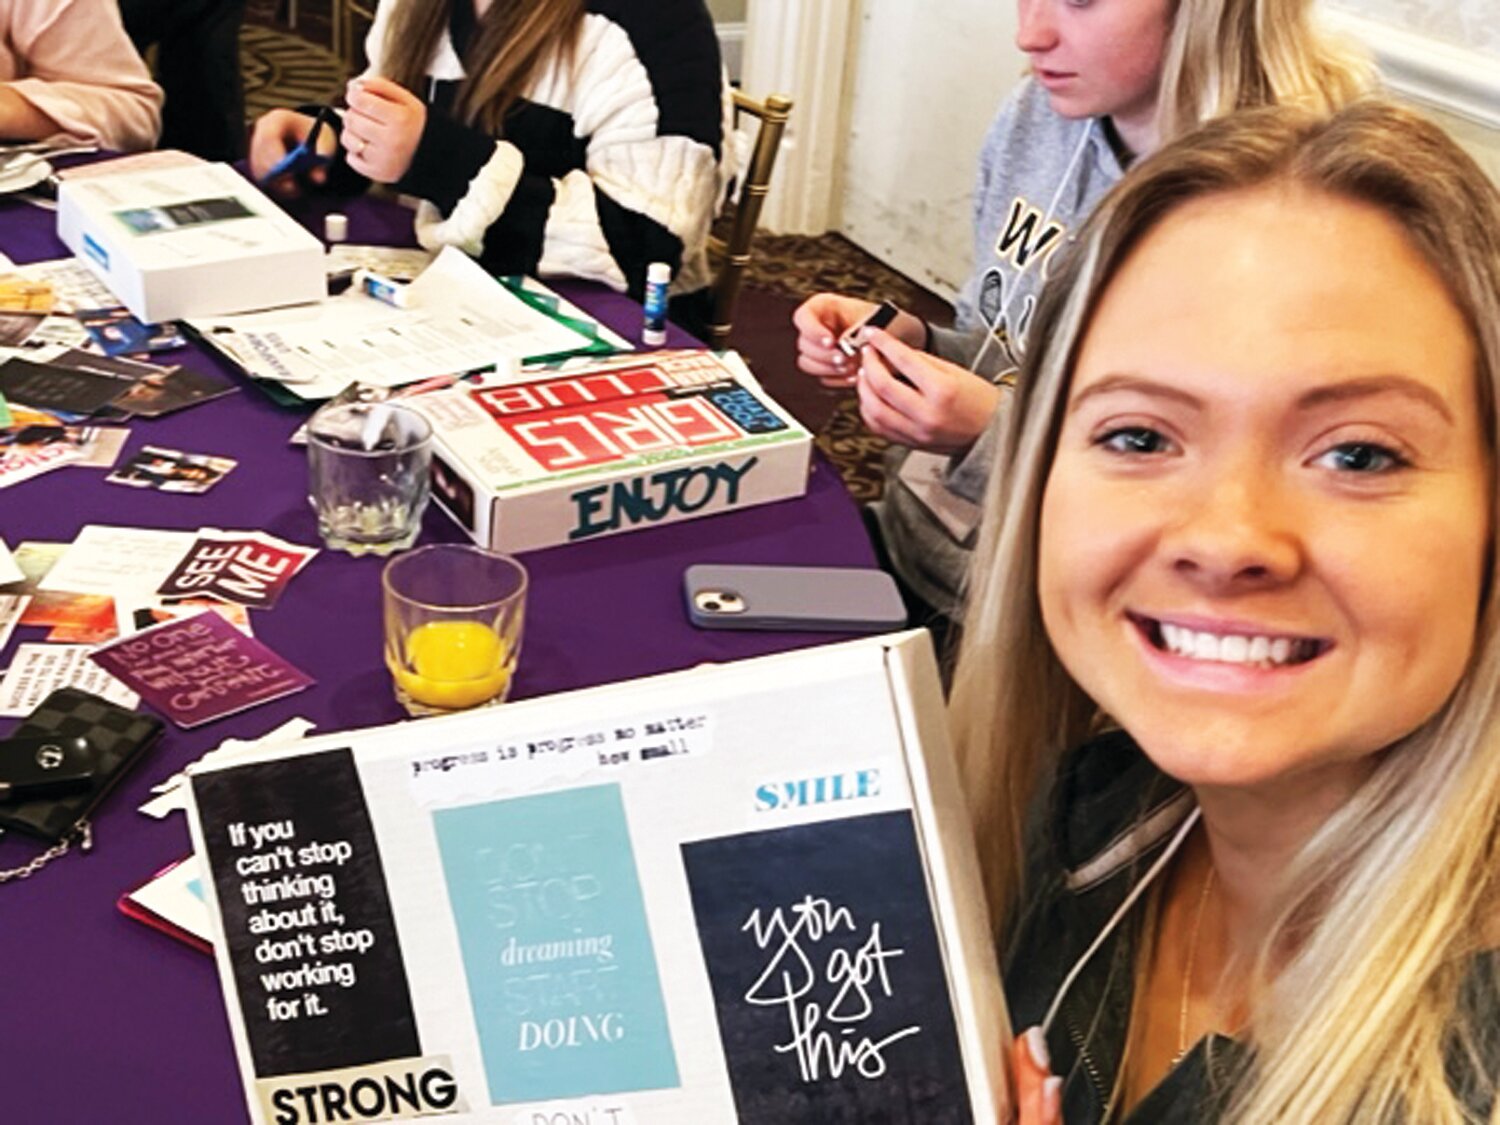 Alycia Szyszko and other attendees create time capsules to store the goals and career plans they develop throughout the day so they can monitor their progress over time.